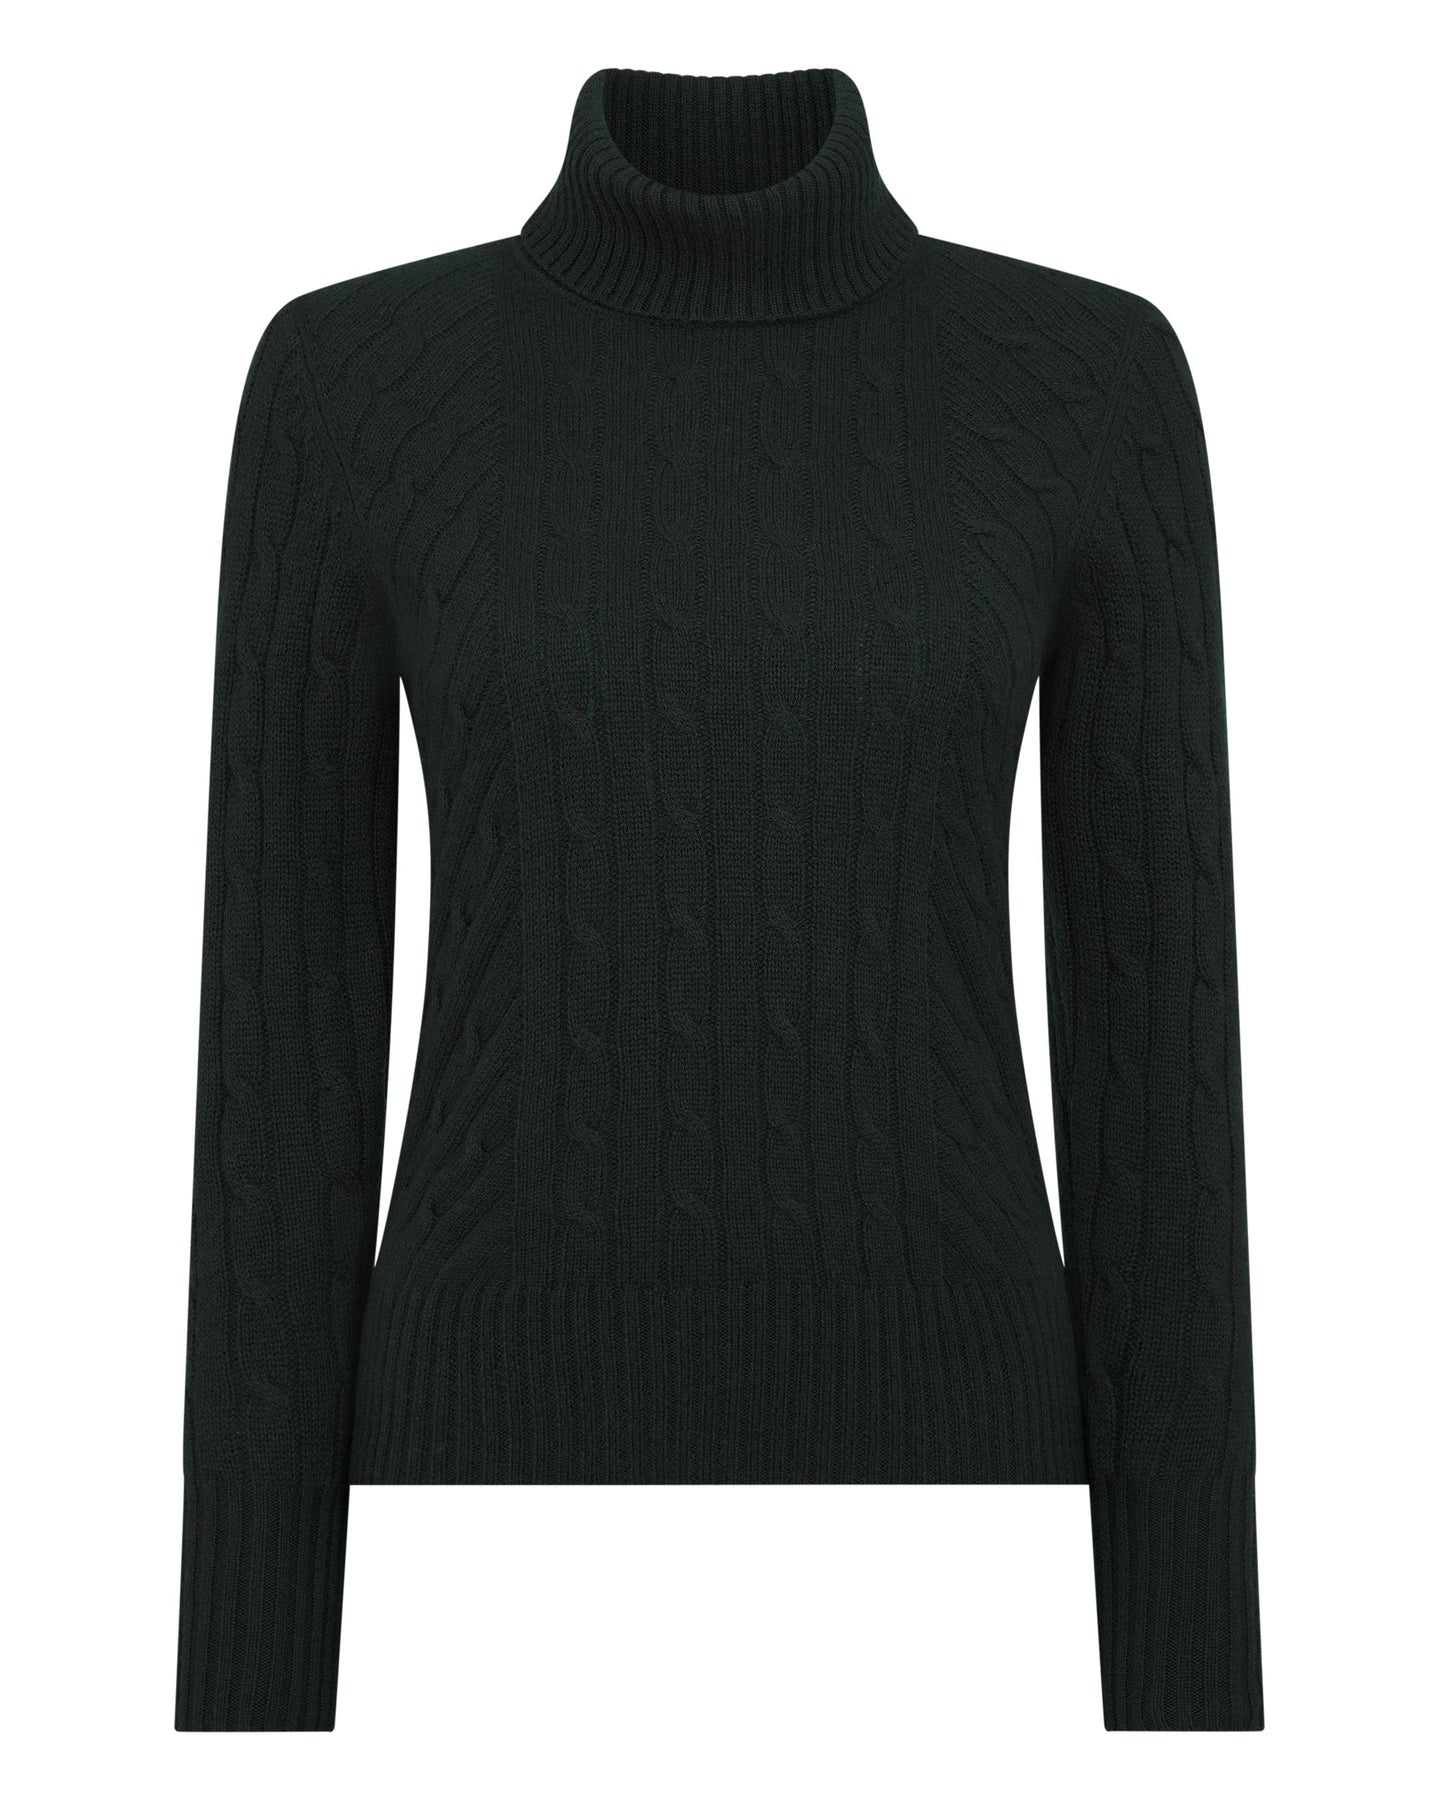 N.Peal Women's Cable Roll Neck Cashmere Jumper Dark Green